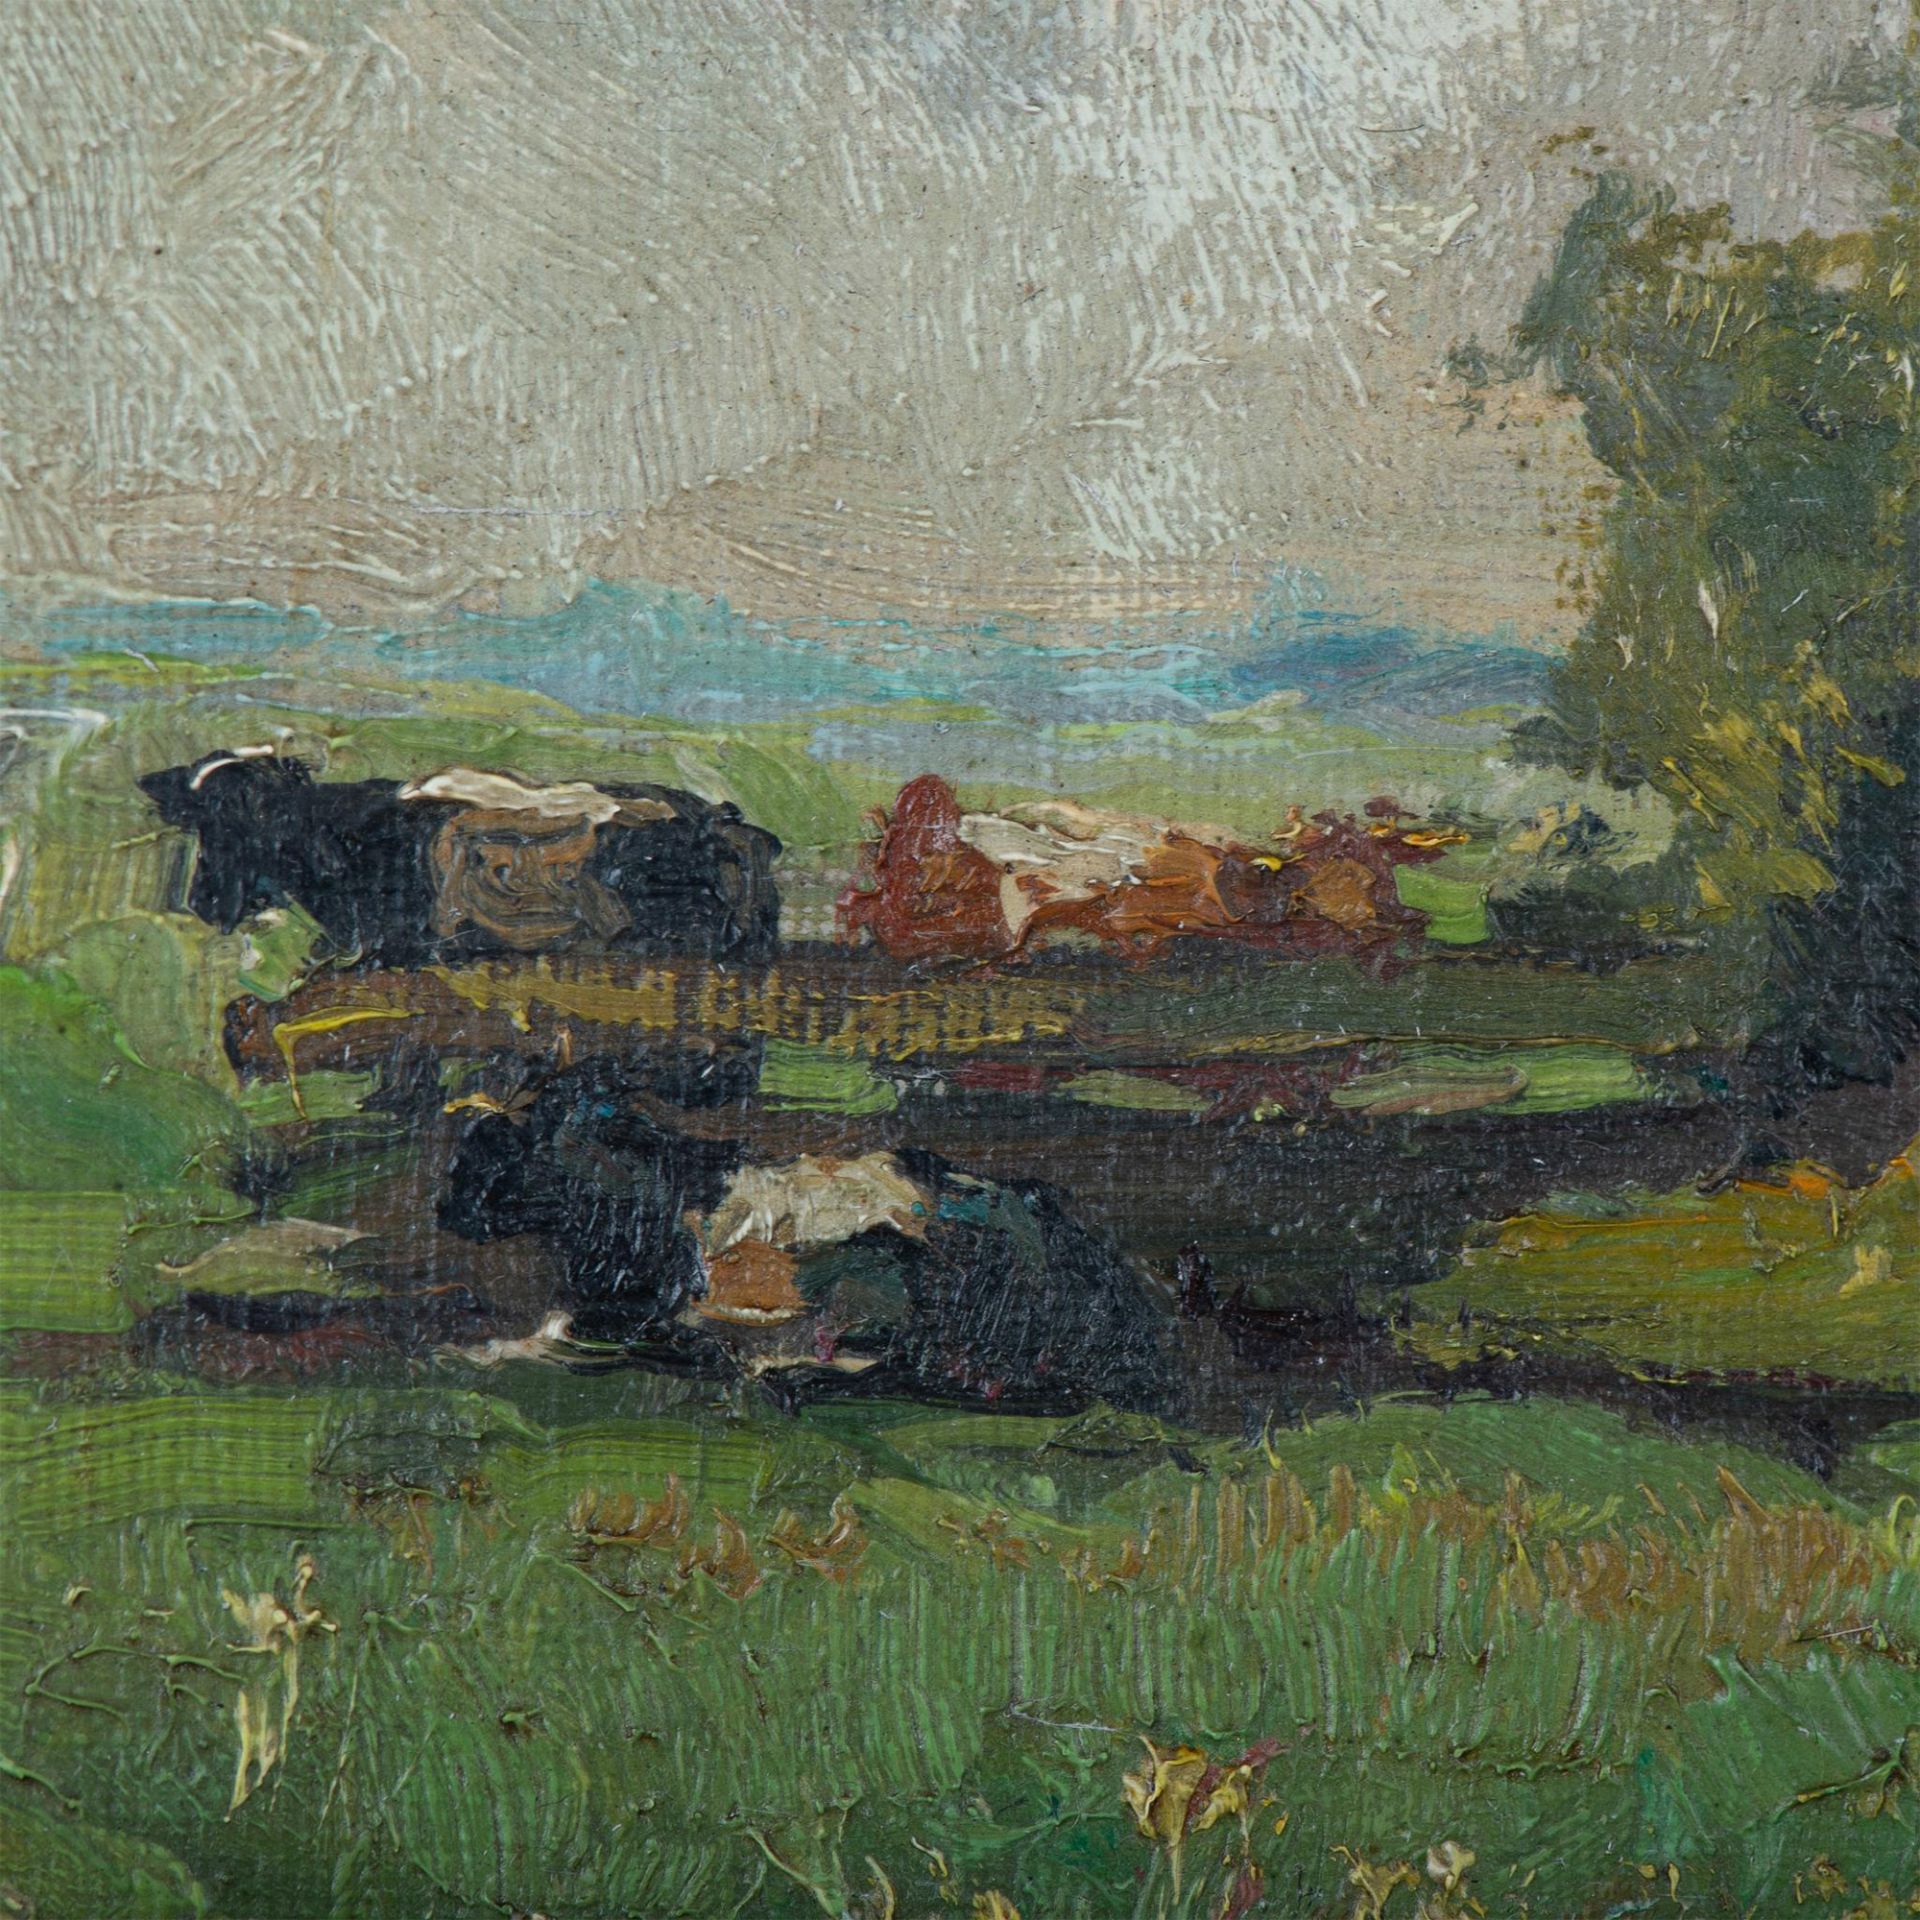 Original Oil on Wooden Board, Picturesque Farm, Signed - Image 4 of 6